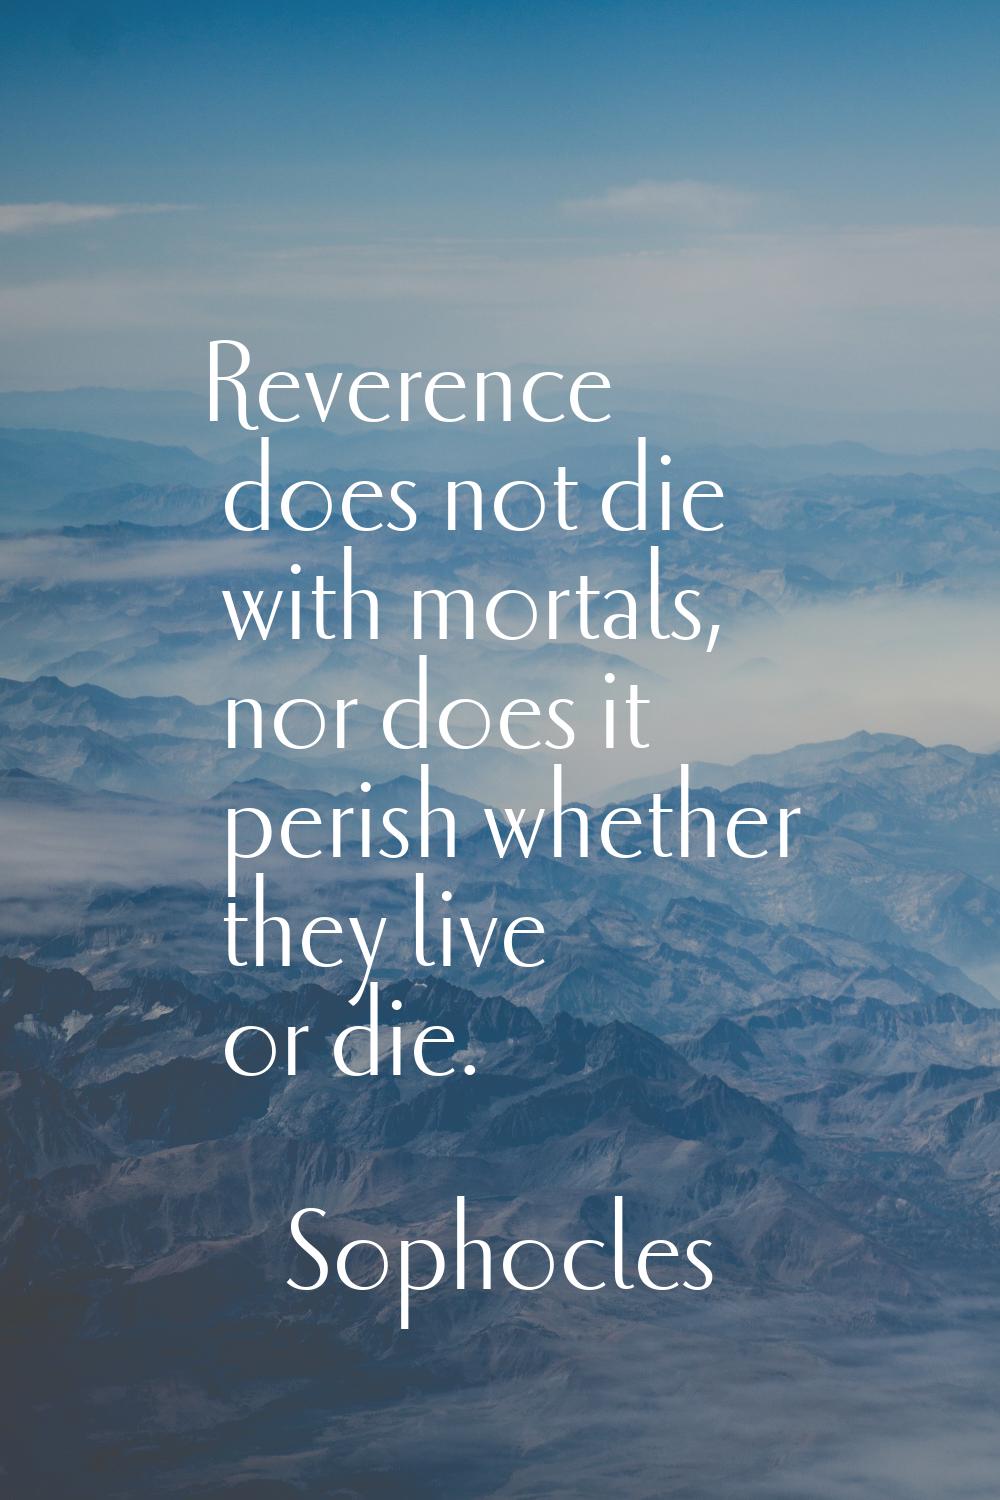 Reverence does not die with mortals, nor does it perish whether they live or die.